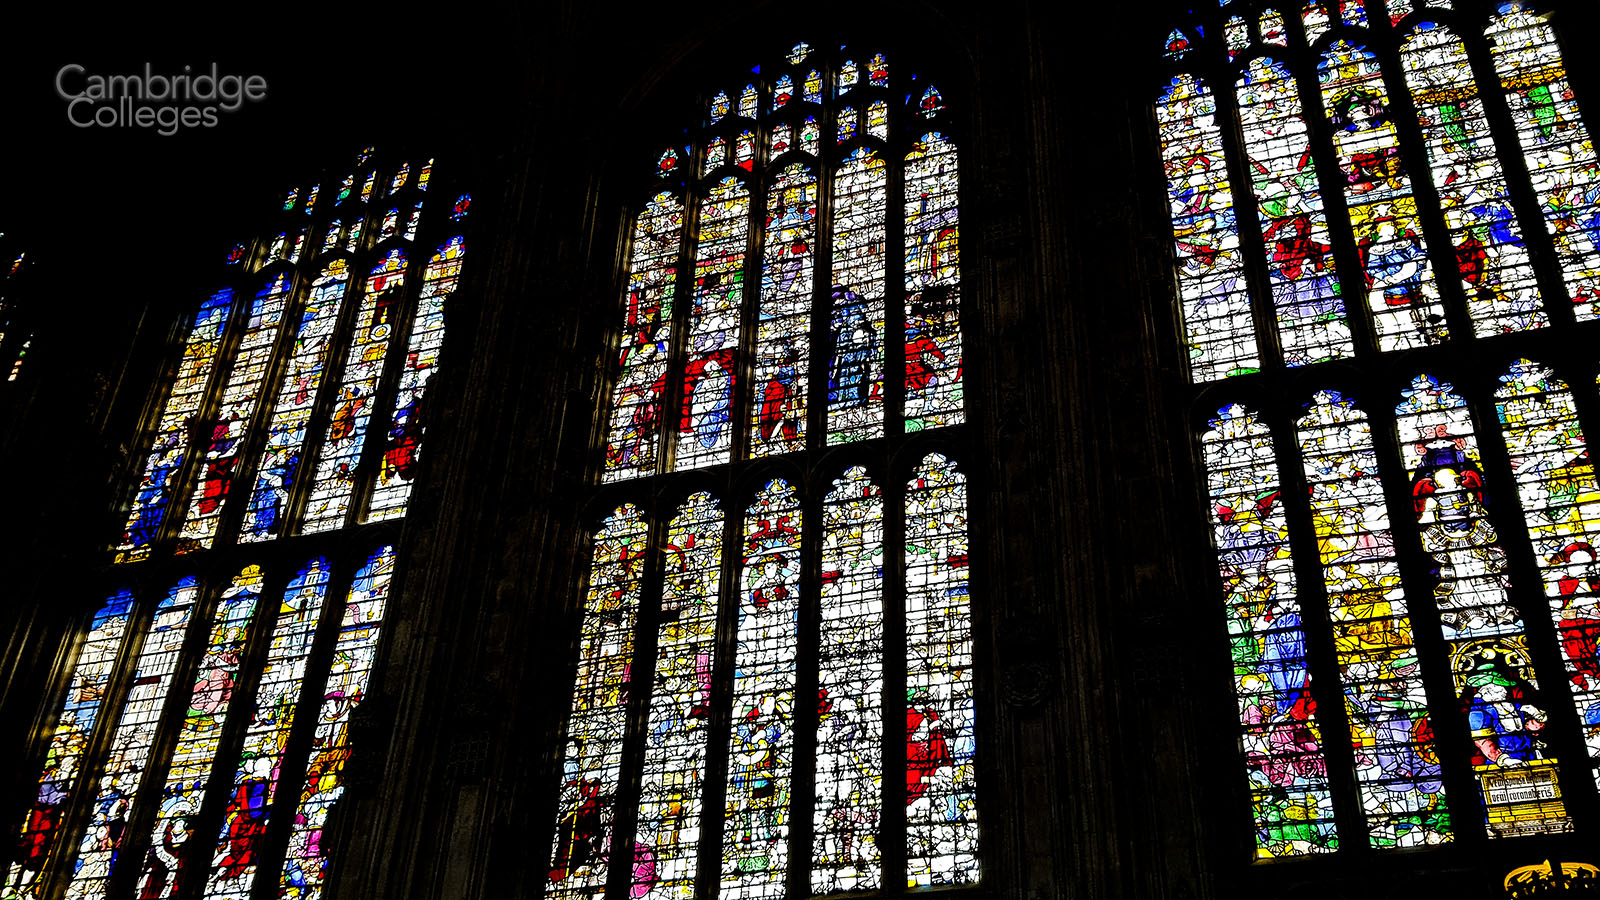 Some of the stained glass windows from Kings college chapel, Cambridge